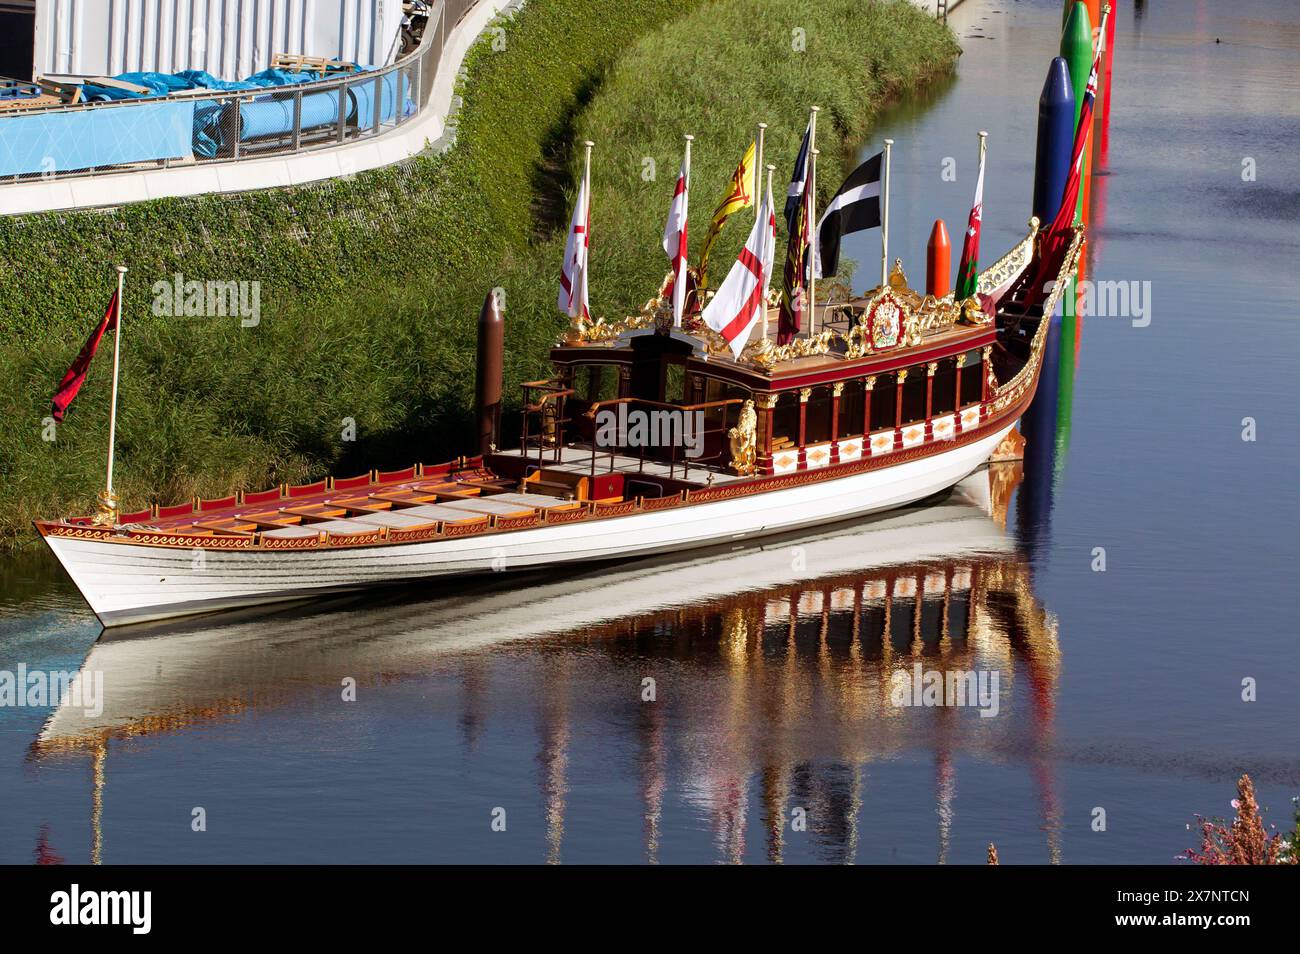 View of the  Royal Barge, Gloriana on display in the River Lea,  during the 2012 London Paralympic Games, Stratford Stock Photo